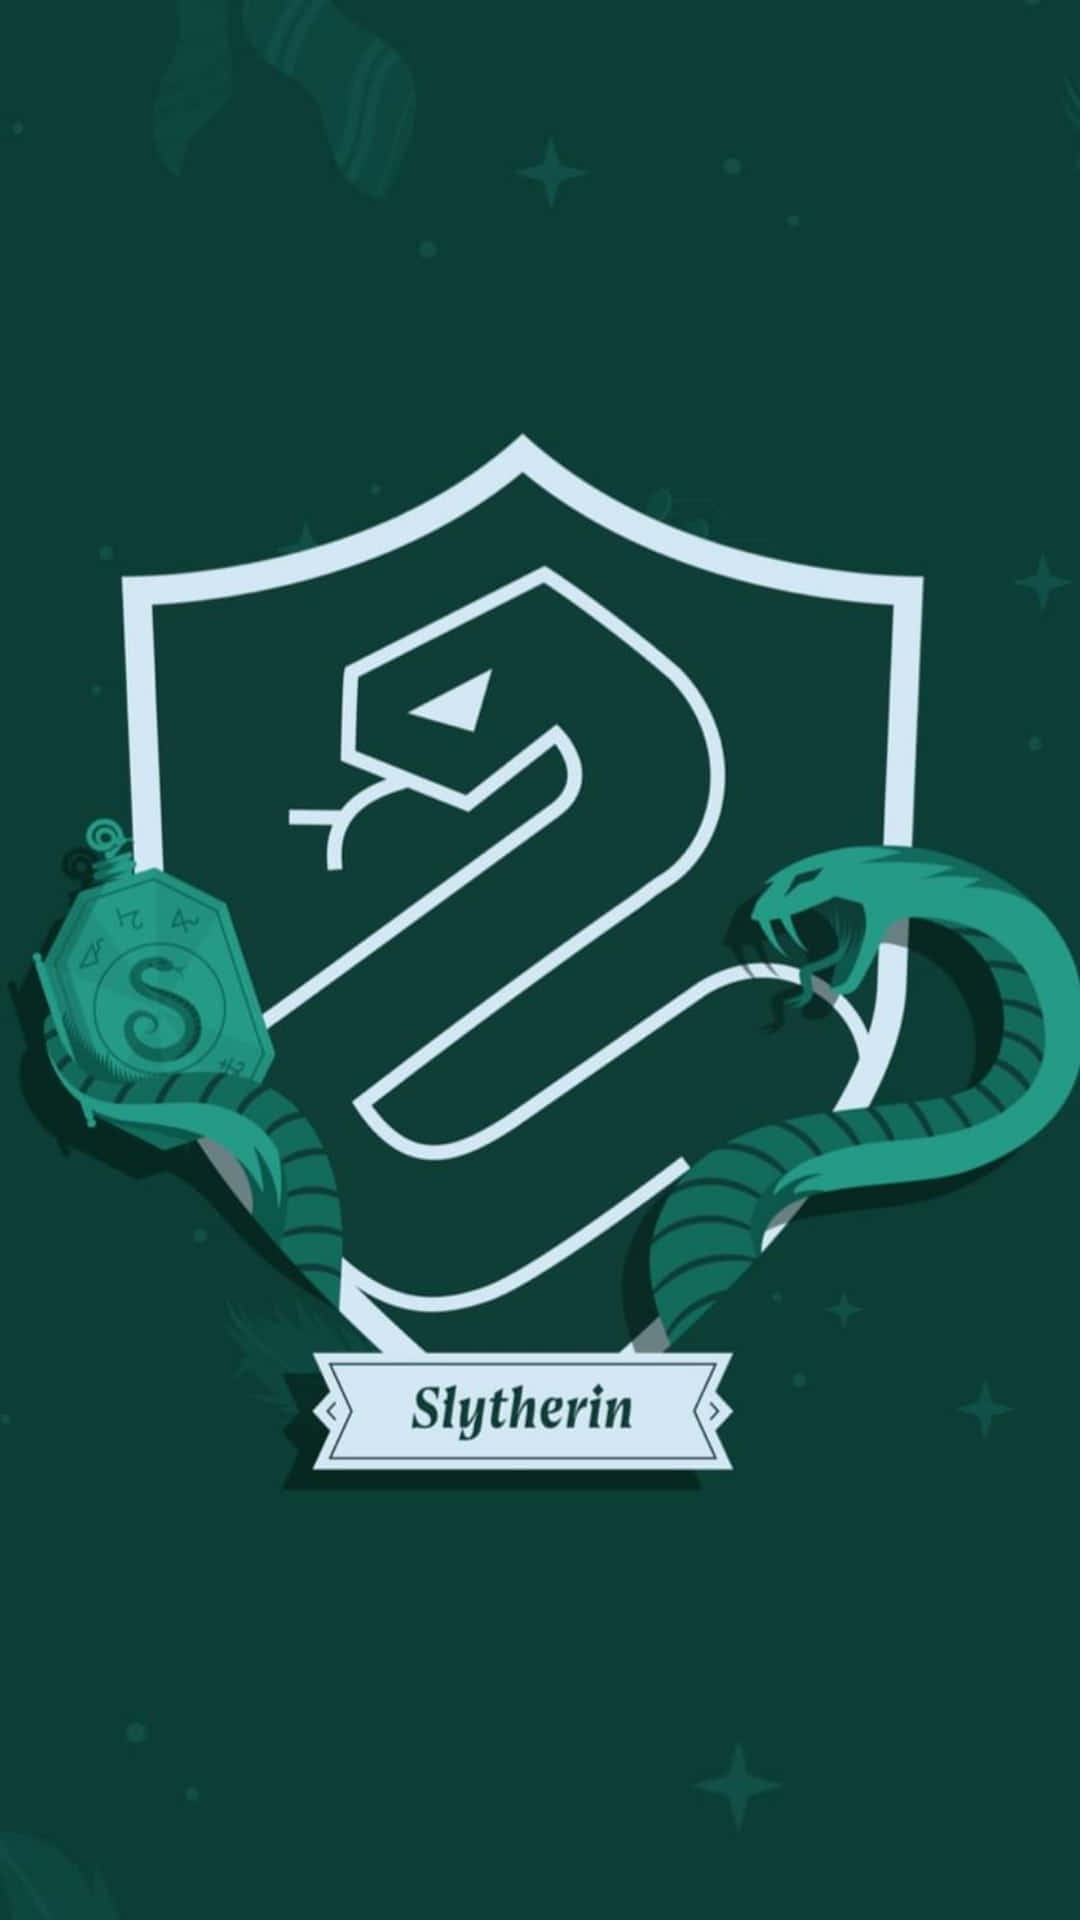 _ Explore The Mysterous World of Slytherin__